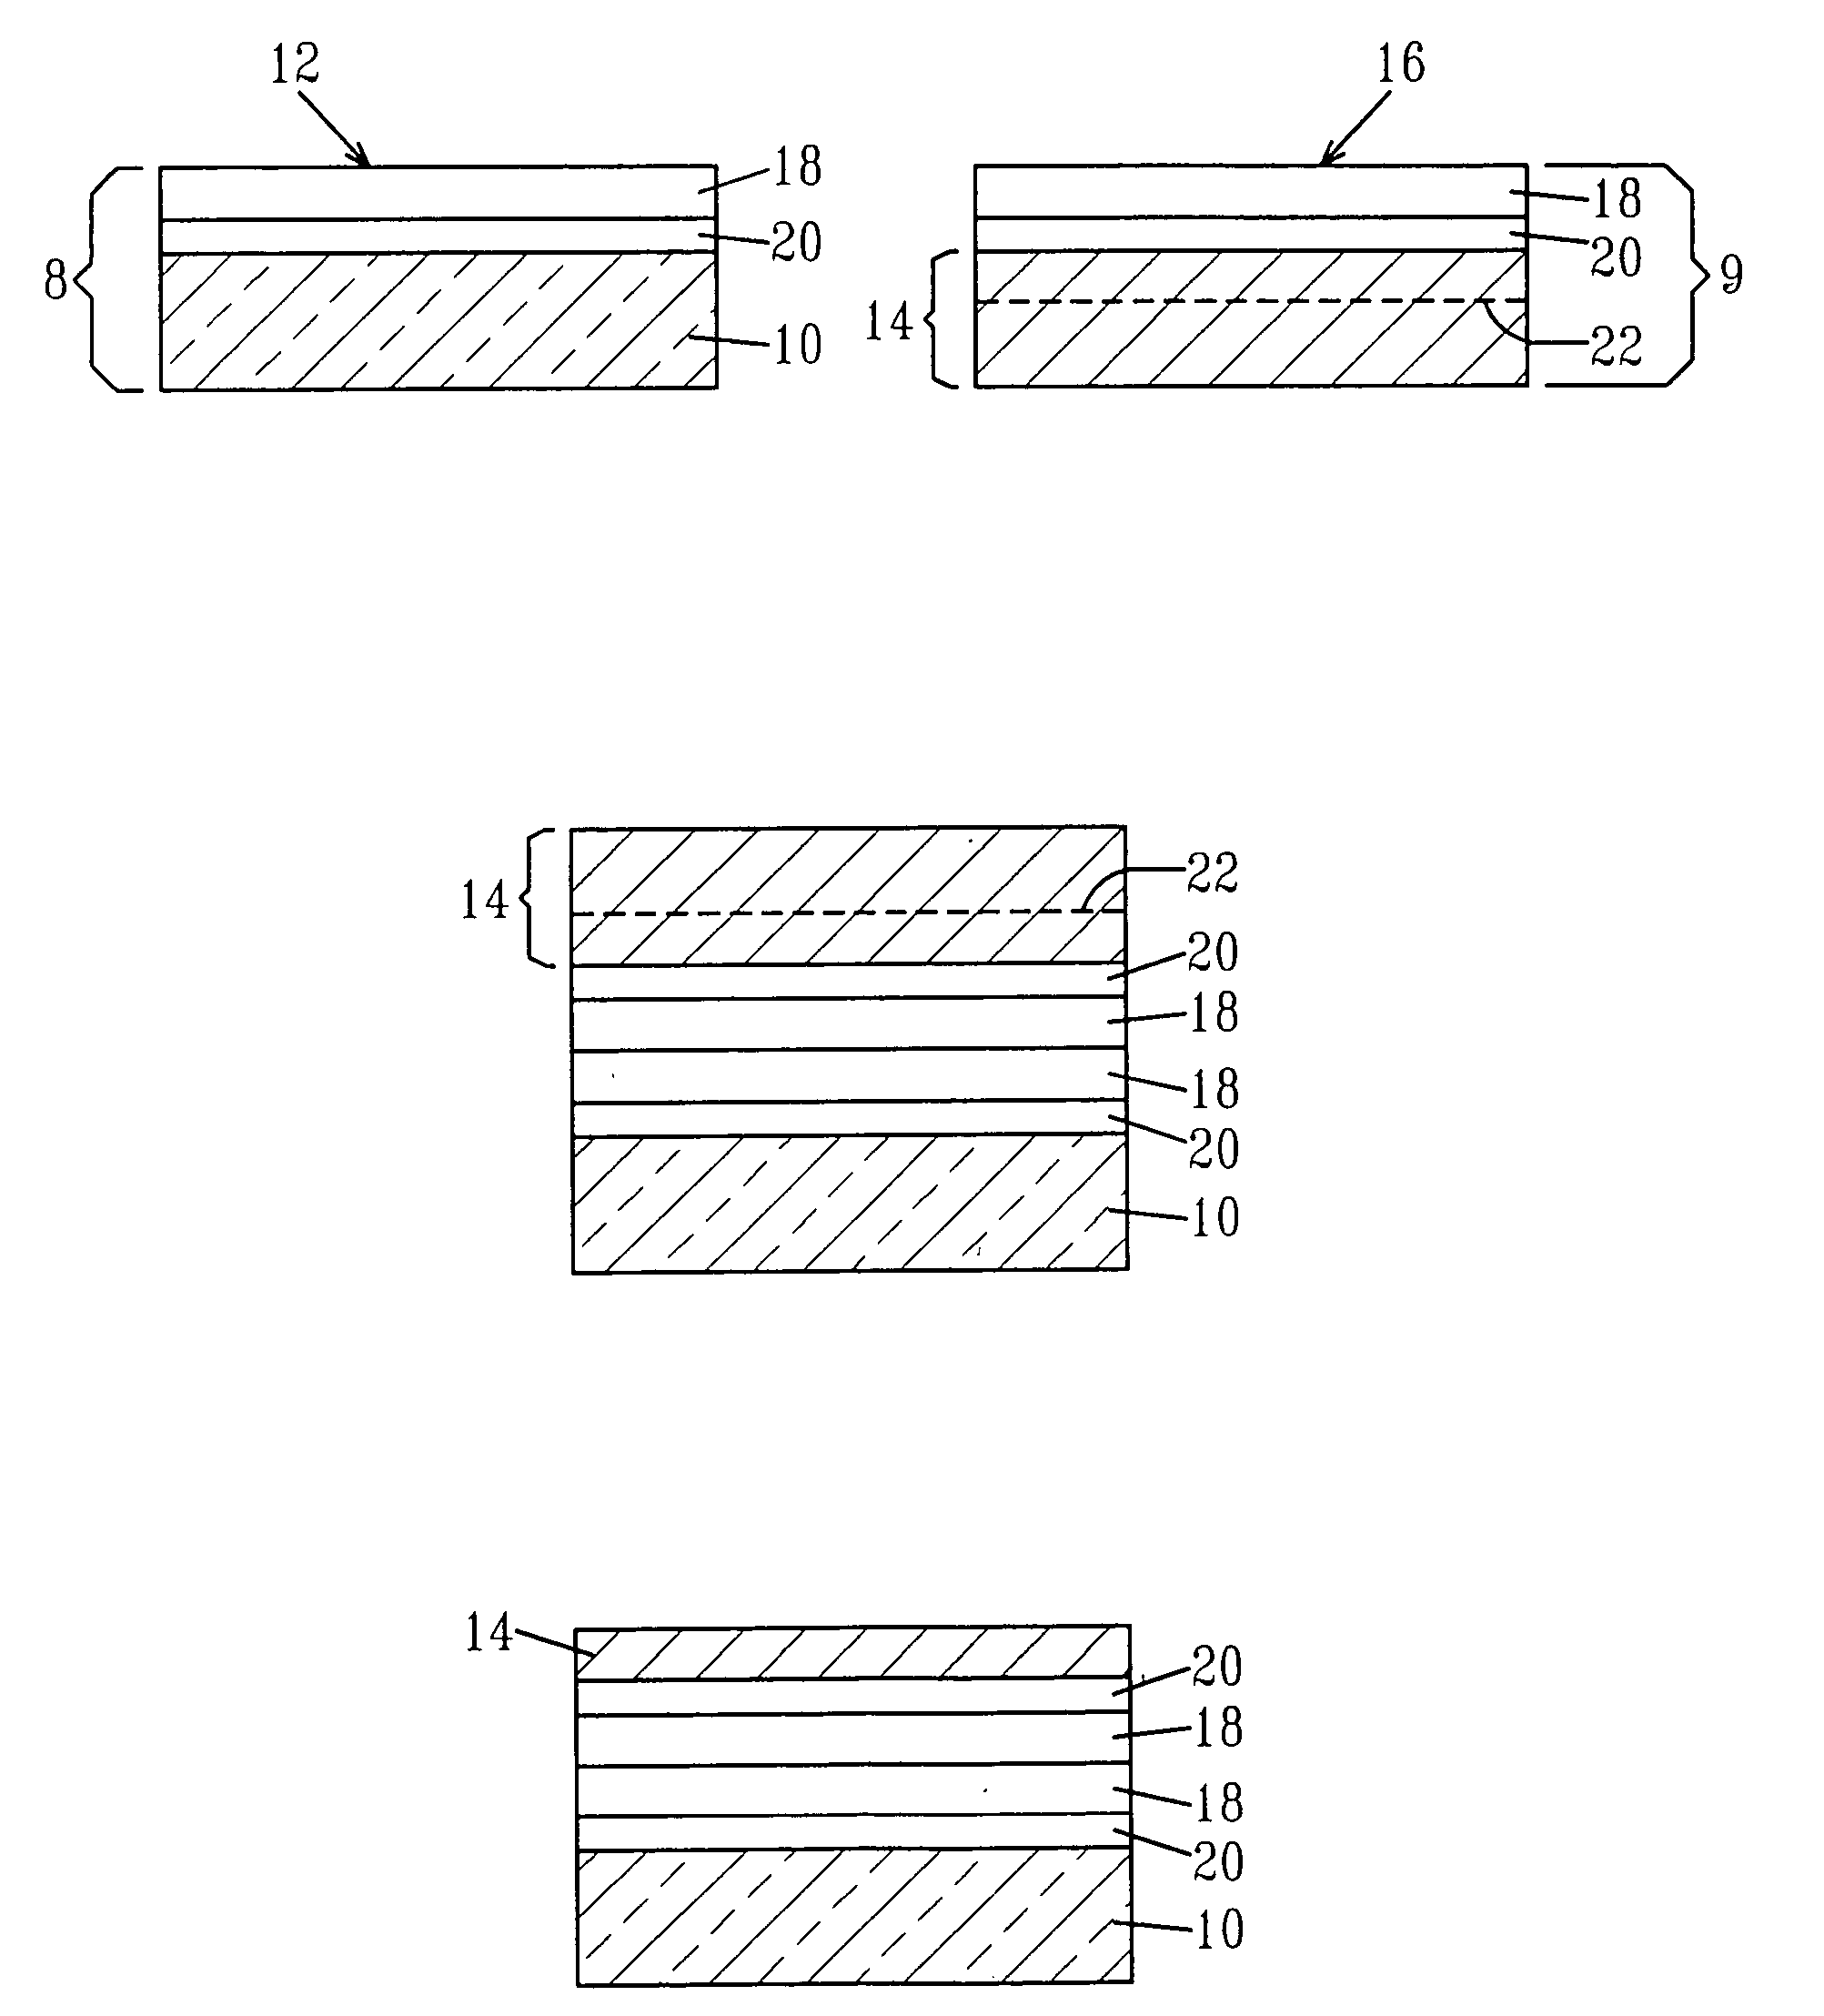 Semiconductor-dielectric-semiconductor device structure fabricated by wafer bonding